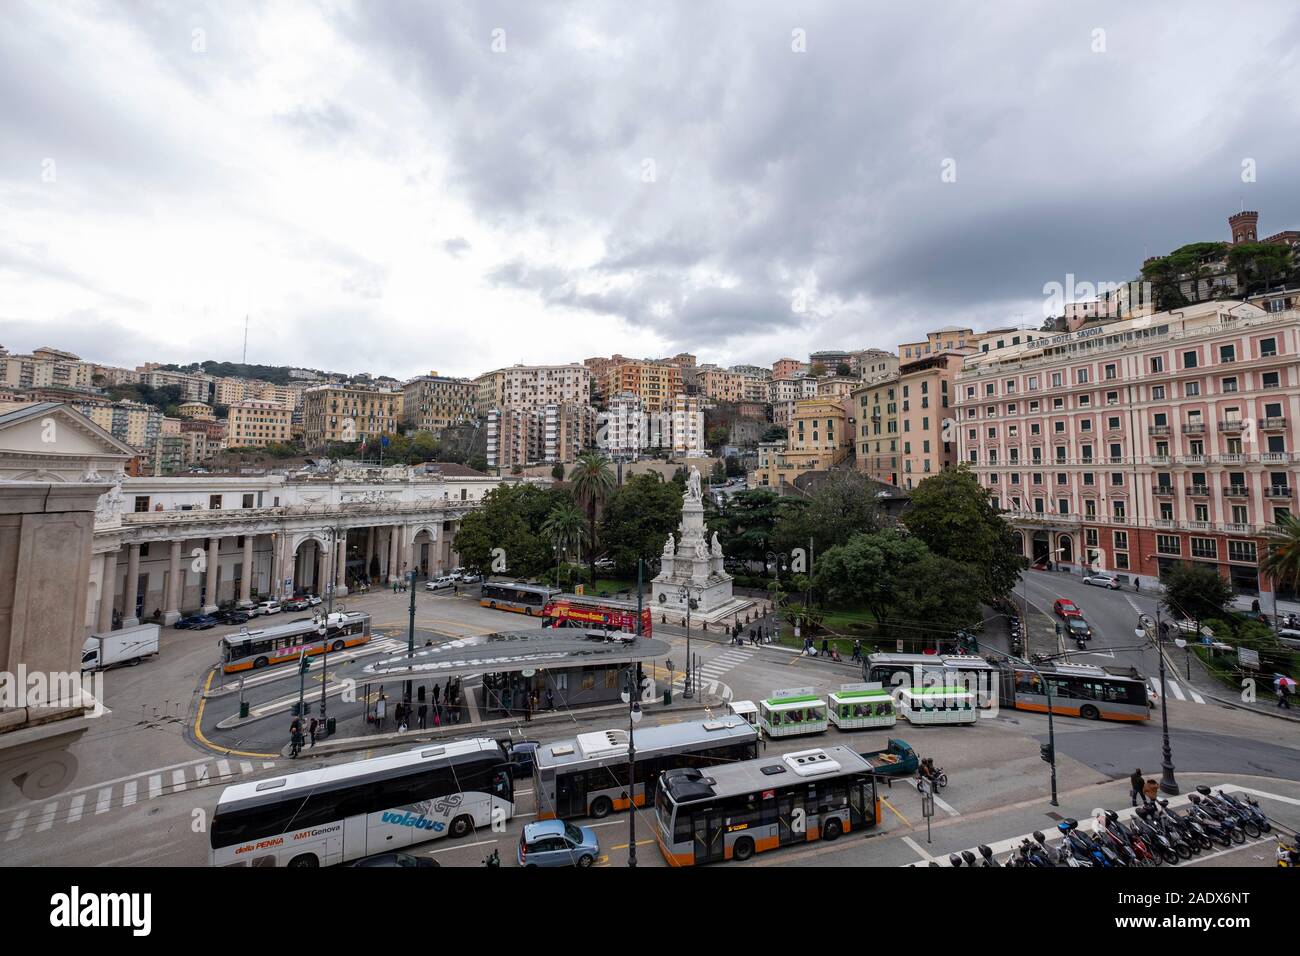 Aerial view of the Genova Piazza Principe train station and the Cristopher Columbus monument at the Piazza Acquaverde in Genoa, Italy, Europe Stock Photo